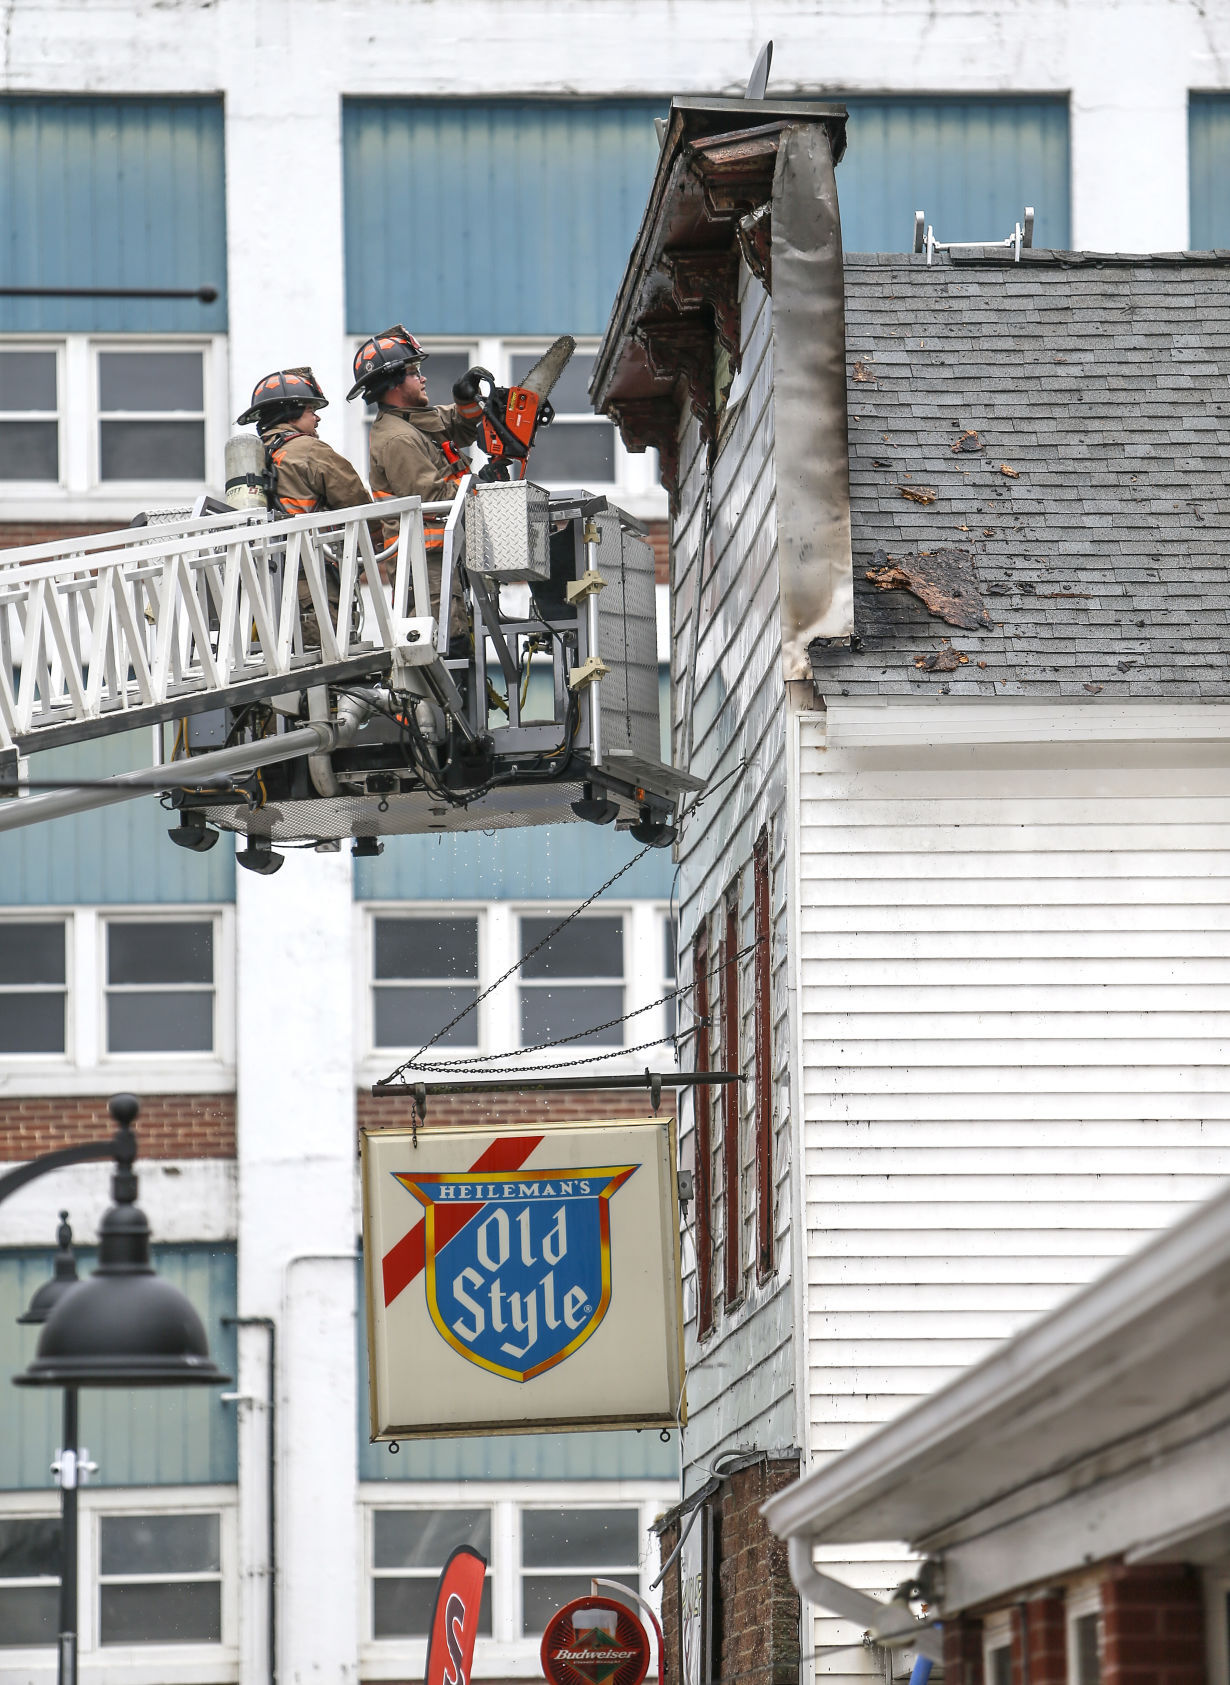 Firefighters look for hot spots after battling a blaze at 101 Jefferson St. in Hanover, Ill., on Wednesday, May 19, 2021. PHOTO CREDIT: Dave Kettering